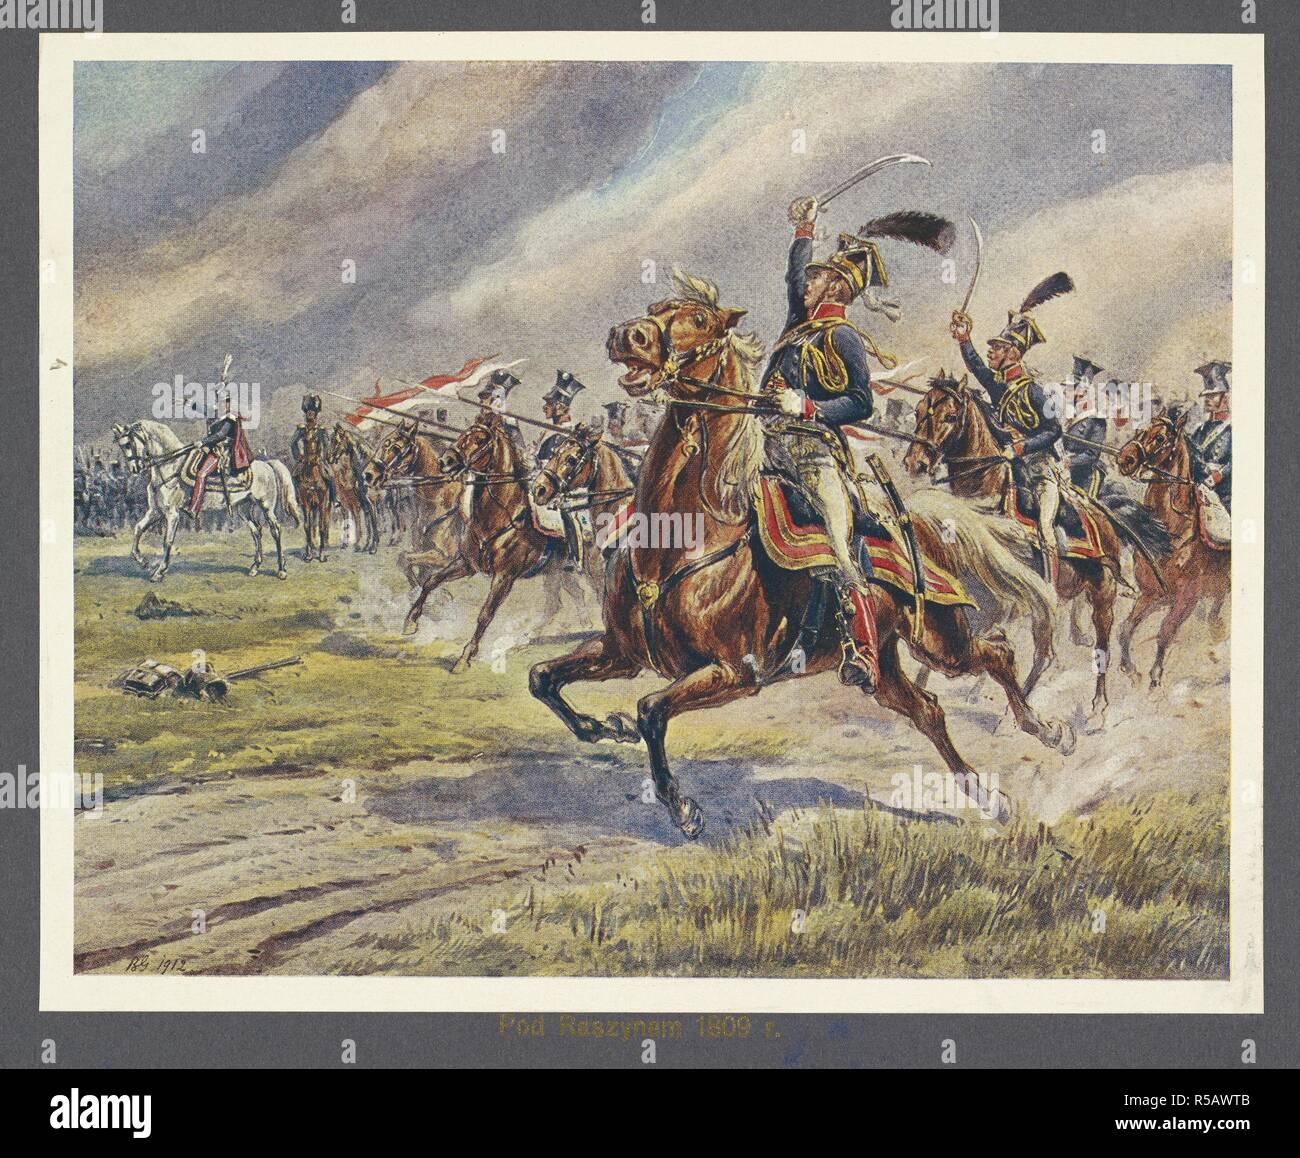 Pod raszynem 1809' (The Battle of Raszyn, 1809). Polish lancers in a cavalry charge. The first Battle of Raszyn was fought on 19 April 1809 between armies of the Austrian Empire and the Duchy of Warsaw, as part of the War of the Fifth Coalition in the Napoleonic Wars. The Austrians were defeated. For this victory, Poniatowski was presented with the grand-aigle de la LÃ©gion d'Honneur, a saber of honor, and a lancer's shako. KsiÃ³Ä…zÌ‡Ã³Ä™ JÃ³zef (Prince JÃ³zef). Ilustracye kolorowe podÅ‚ug obrazÃ³w Br. Gembarzewskiego. [With plates, including portraits.]. Bytom, 1913. Source: 10797.d.2 plate o Stock Photo